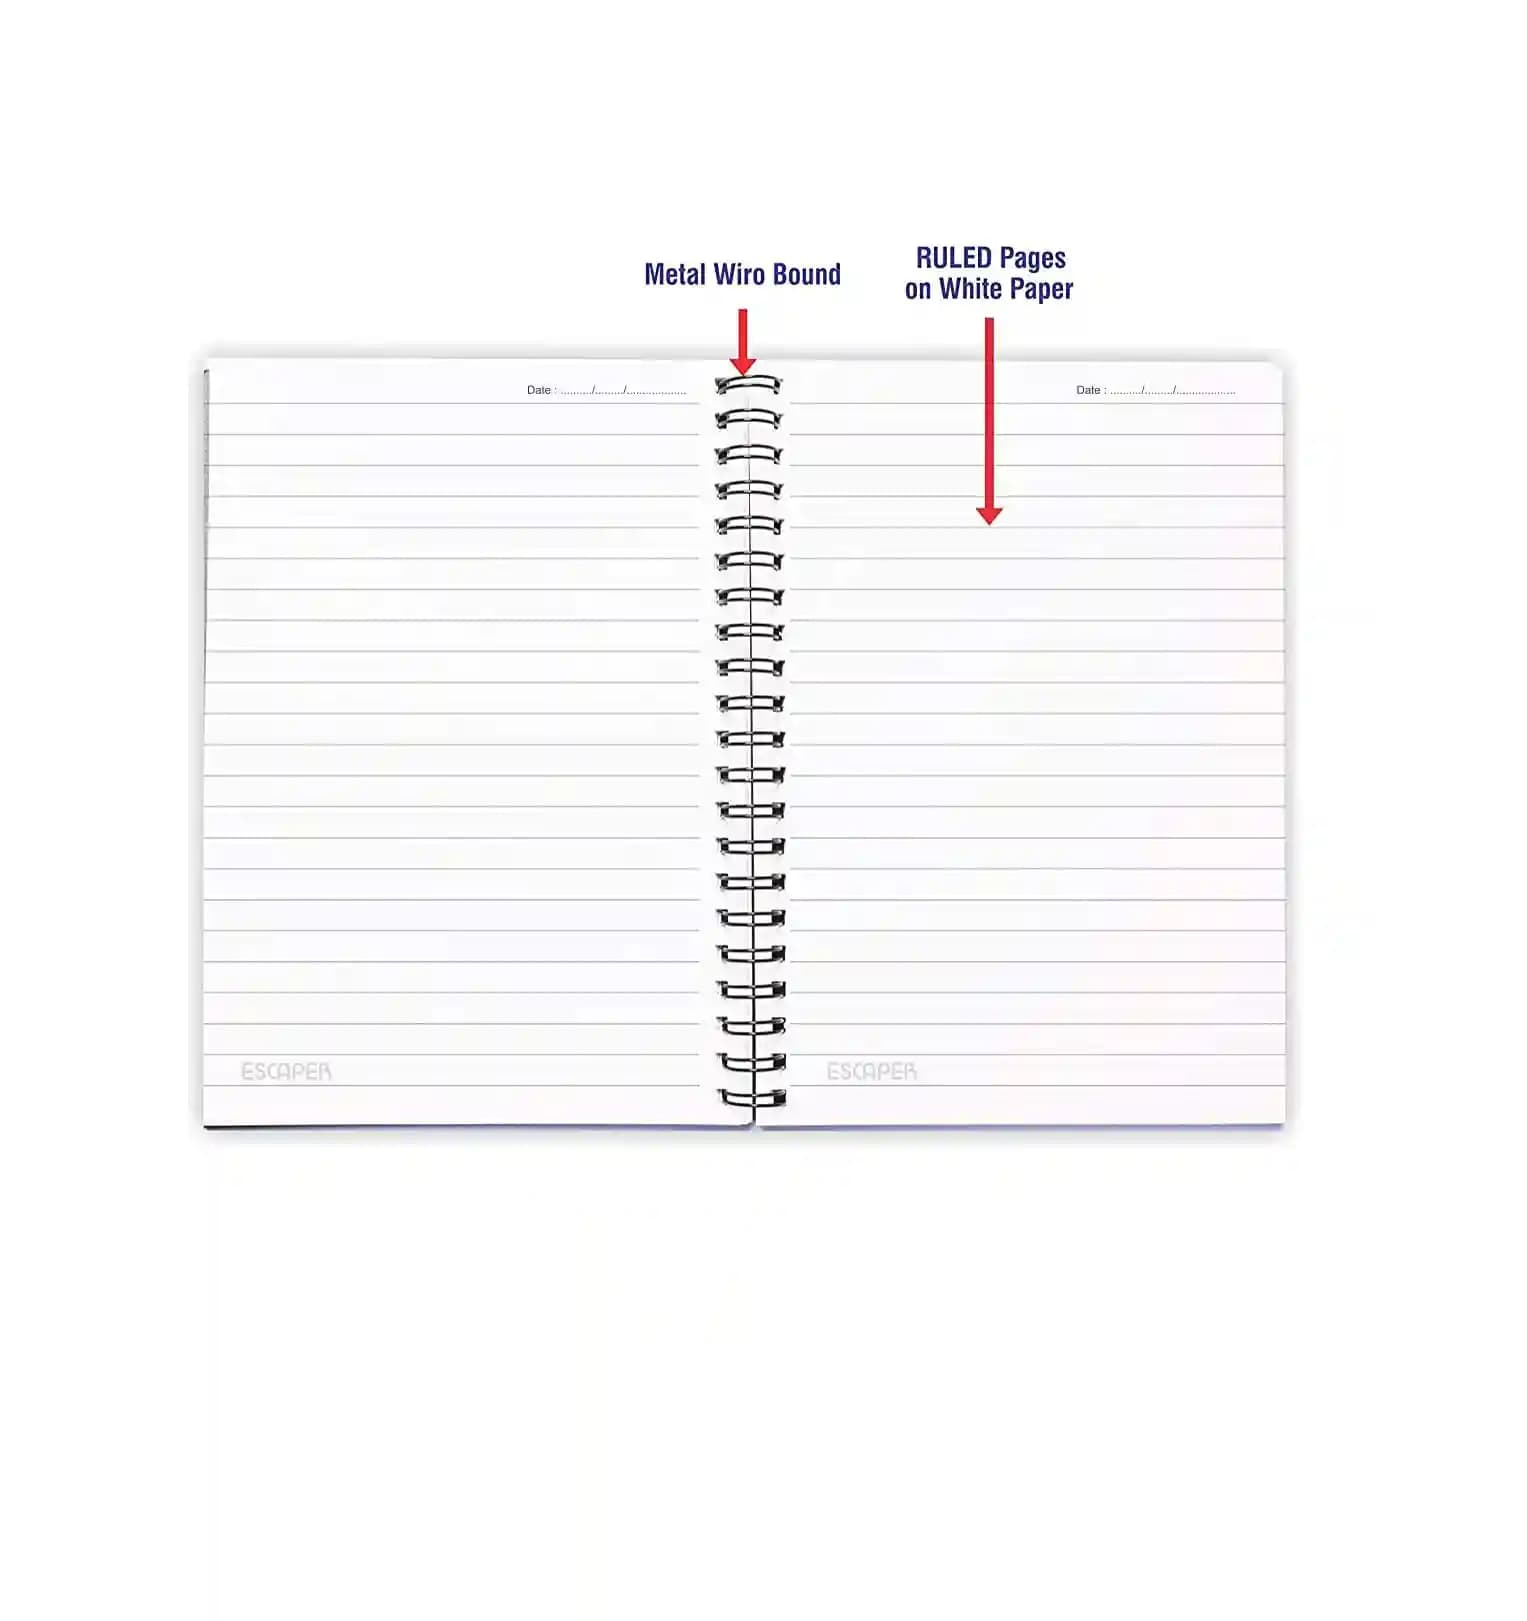 Travel Far Enough Meet Yourself Motivation Ruled Diaries - Pack Of 3